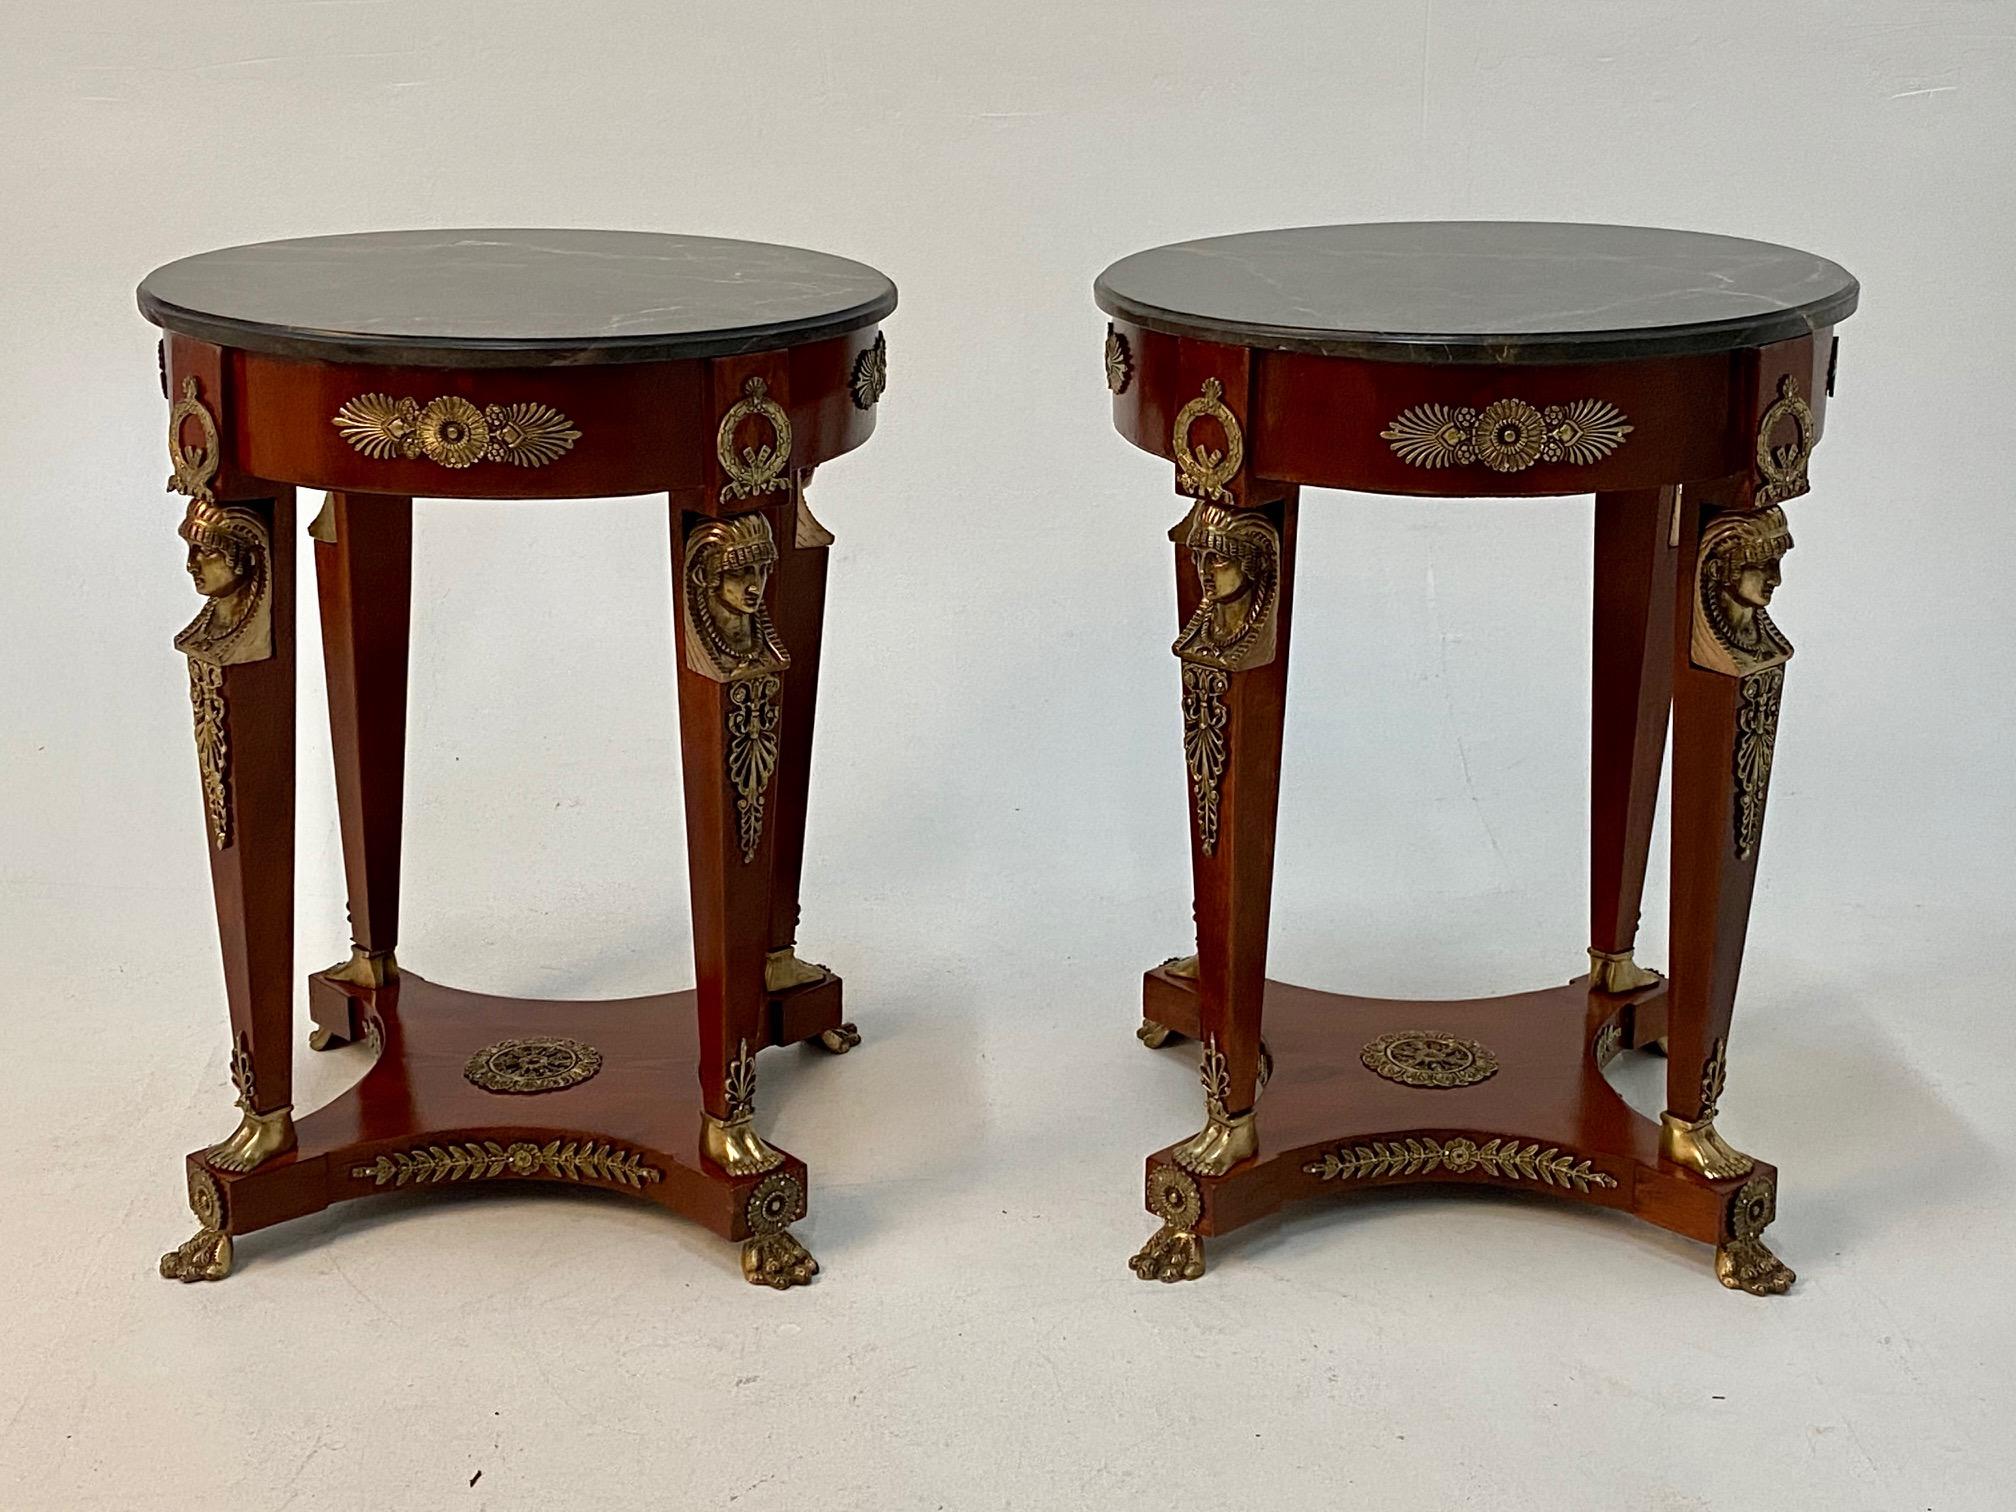 Spanish Superb Ornate Pair of Mahogany and Bronze French Empire Style End Tables